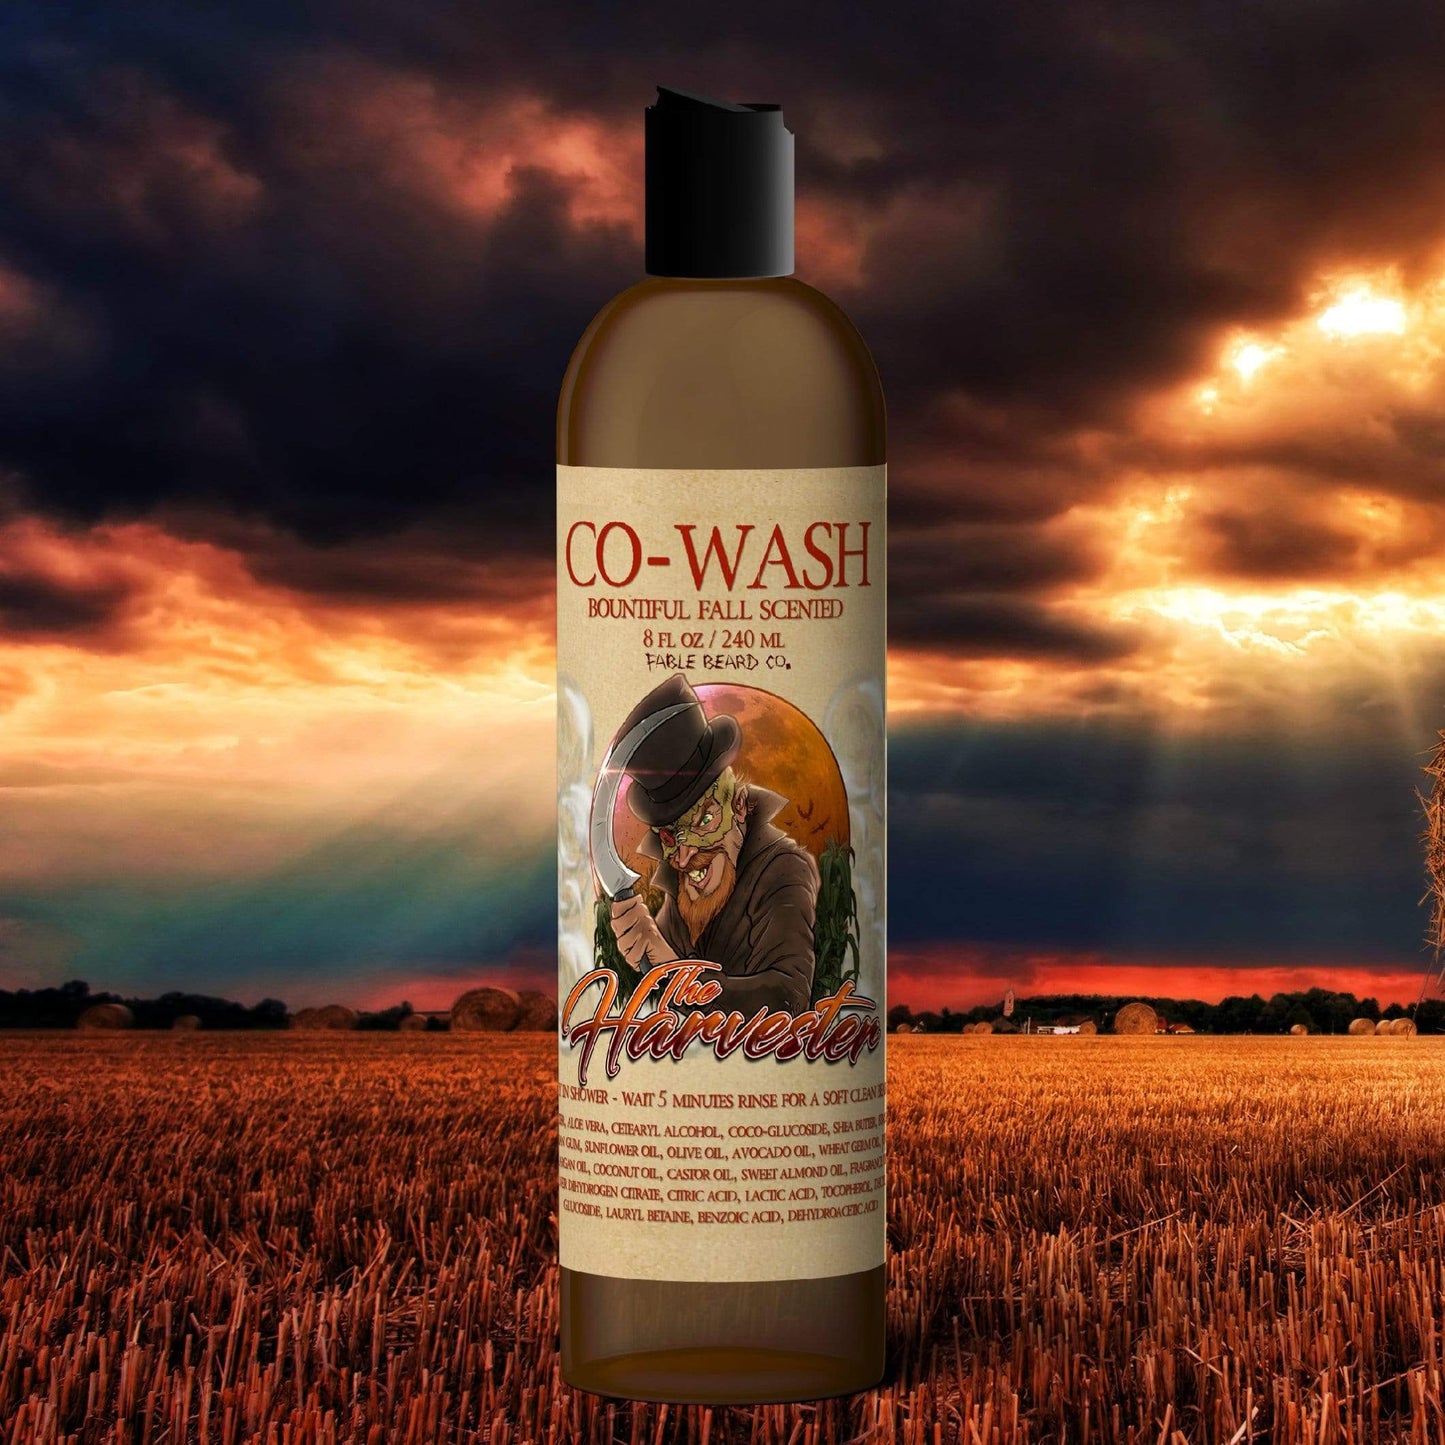 The Harvester Co-Wash - Spiced Apple & Fall Breeze Beard Conditioner